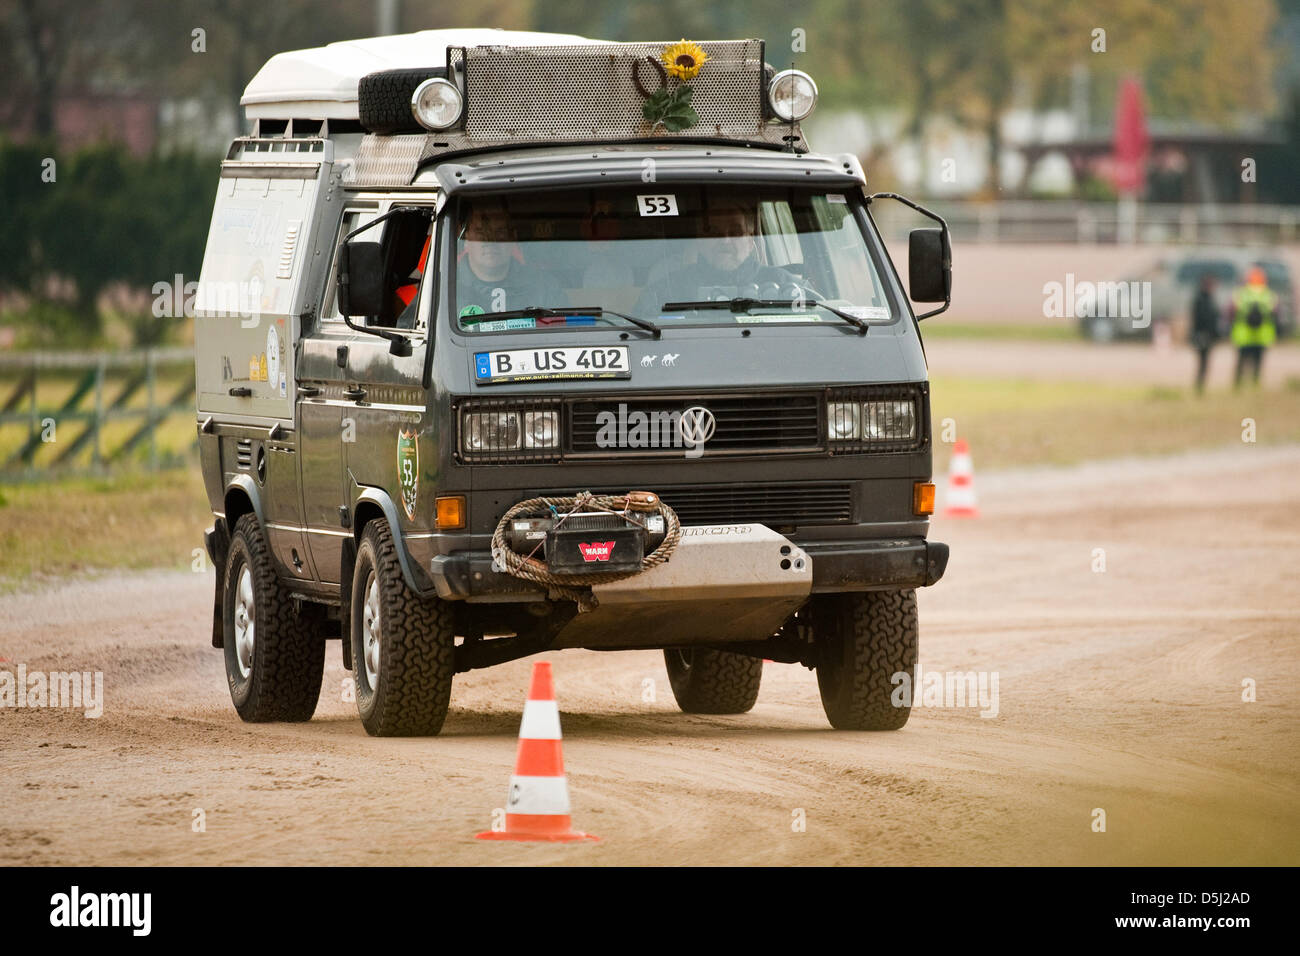 A VW T3 DoKa is pictured as part of the first 'Revival Berlin' autumn classic car rally at Mariendorf harness racing track in Berlin, Germany, 10 50 classic